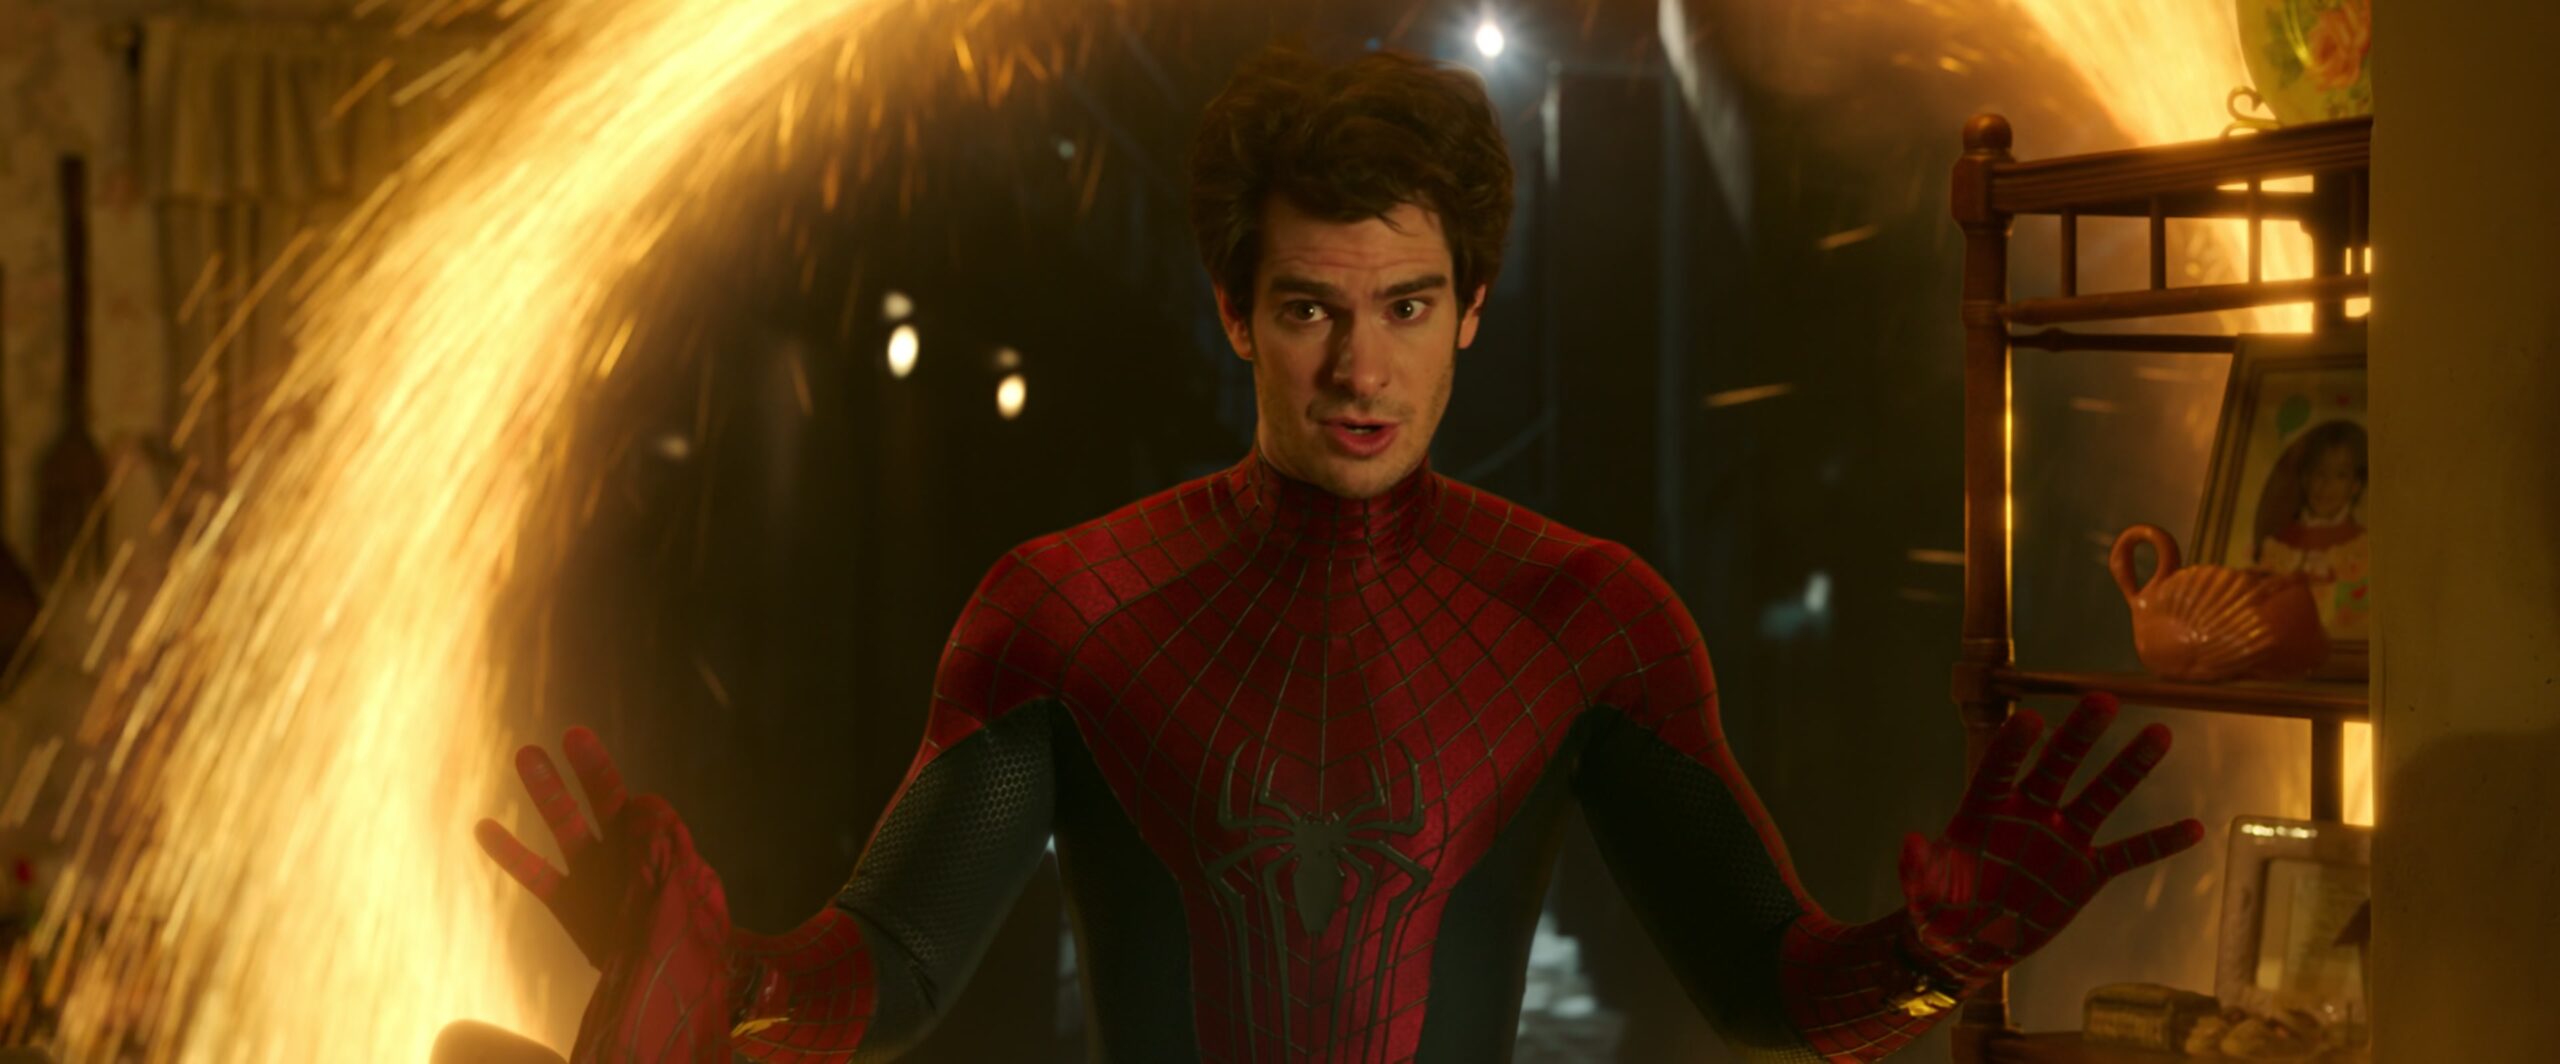 Peter Parker (Andrew Garfield) in Spider-Man: No Way Home (2021), Marvel Entertainment